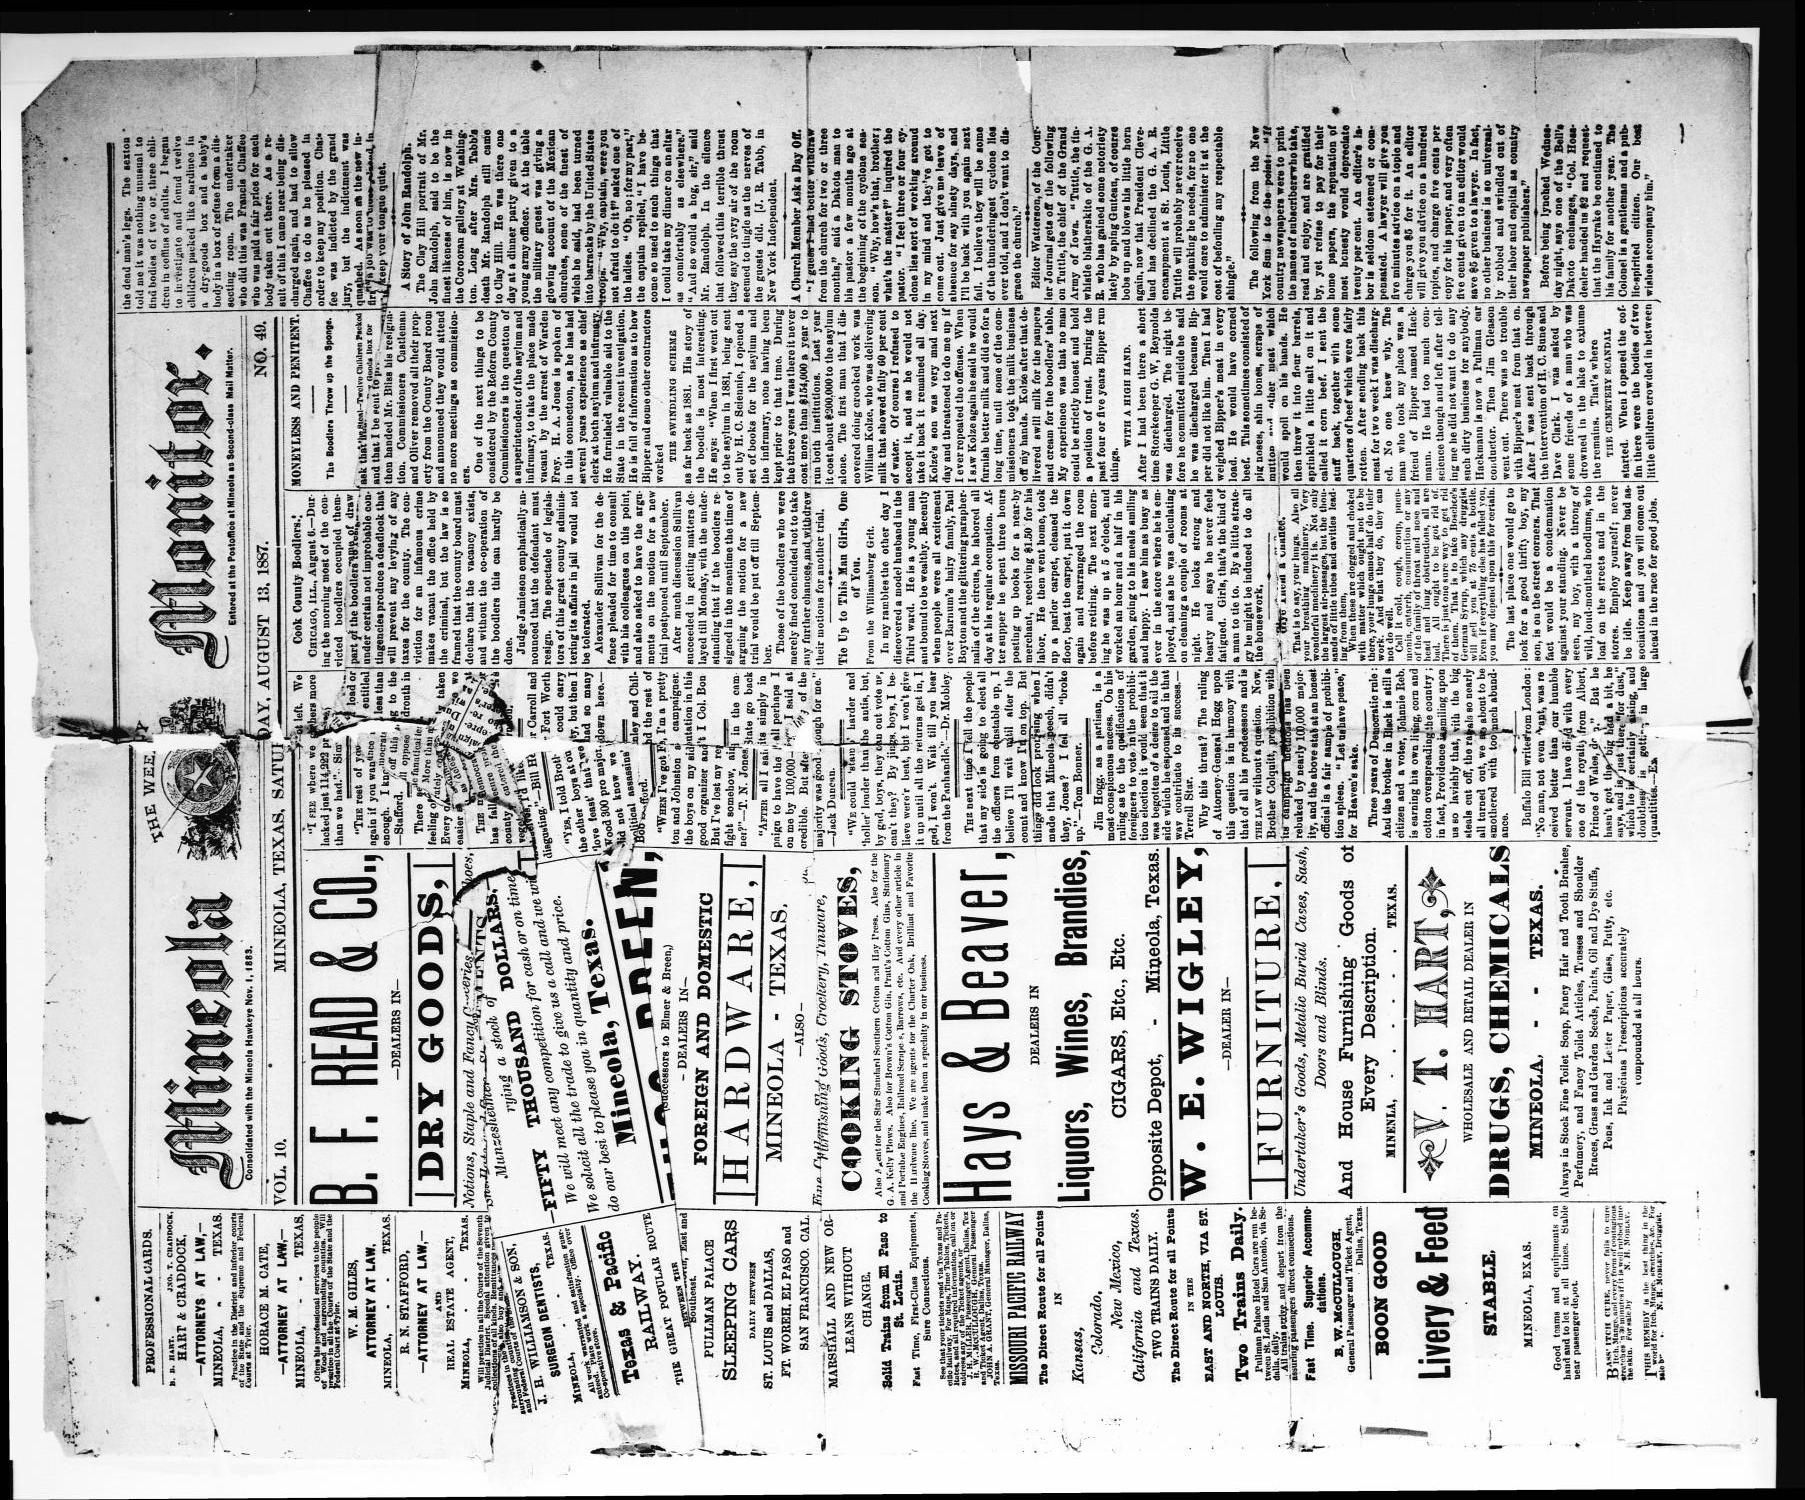 The Weekly Mineola Monitor (Mineola, Tex.), Vol. 10, No. 49, Ed. 1 Saturday, August 13, 1887
                                                
                                                    [Sequence #]: 1 of 4
                                                